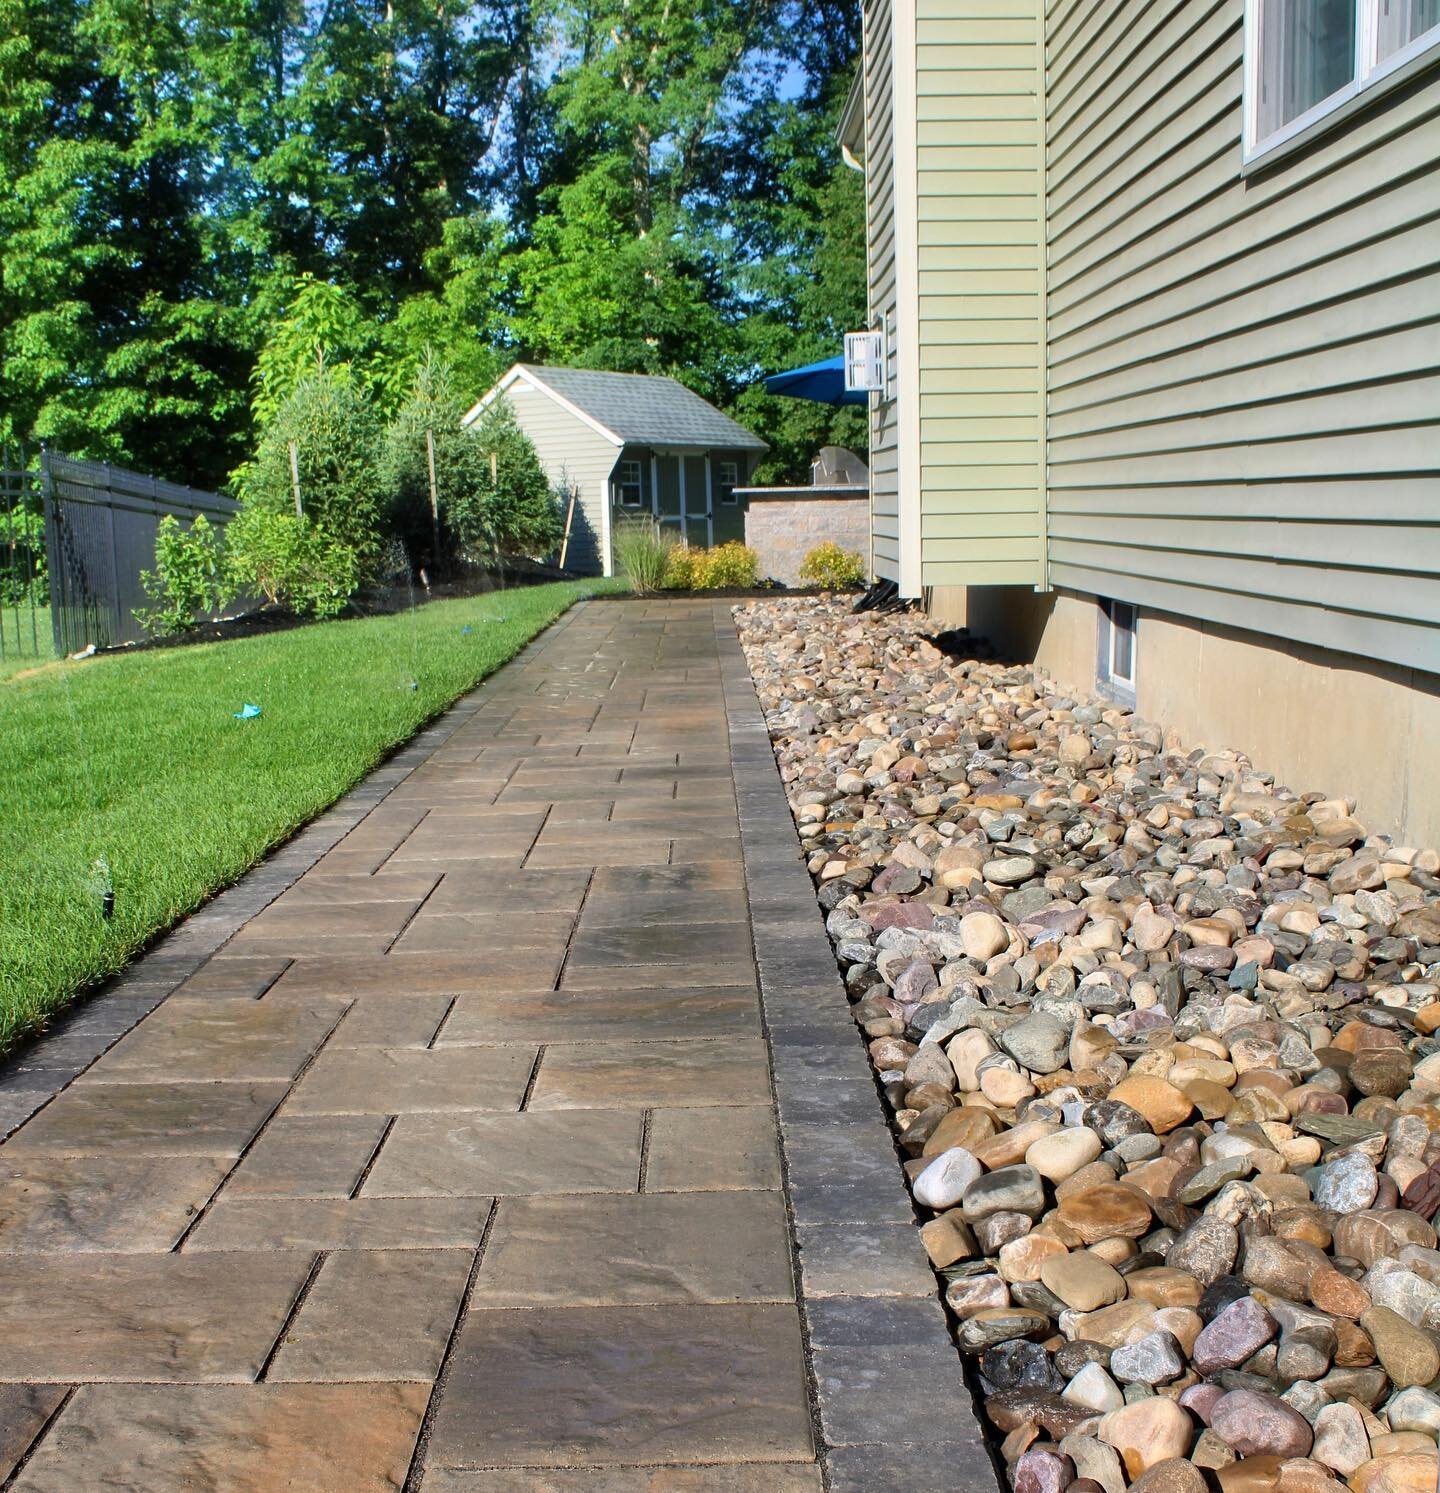 A paver patio, walkway or driveway already sets your home apart from others using poured concrete or asphalt. But a really cool attribute that comes with these pavers is that they provide us the ability to also create a paver design that is uniquely 